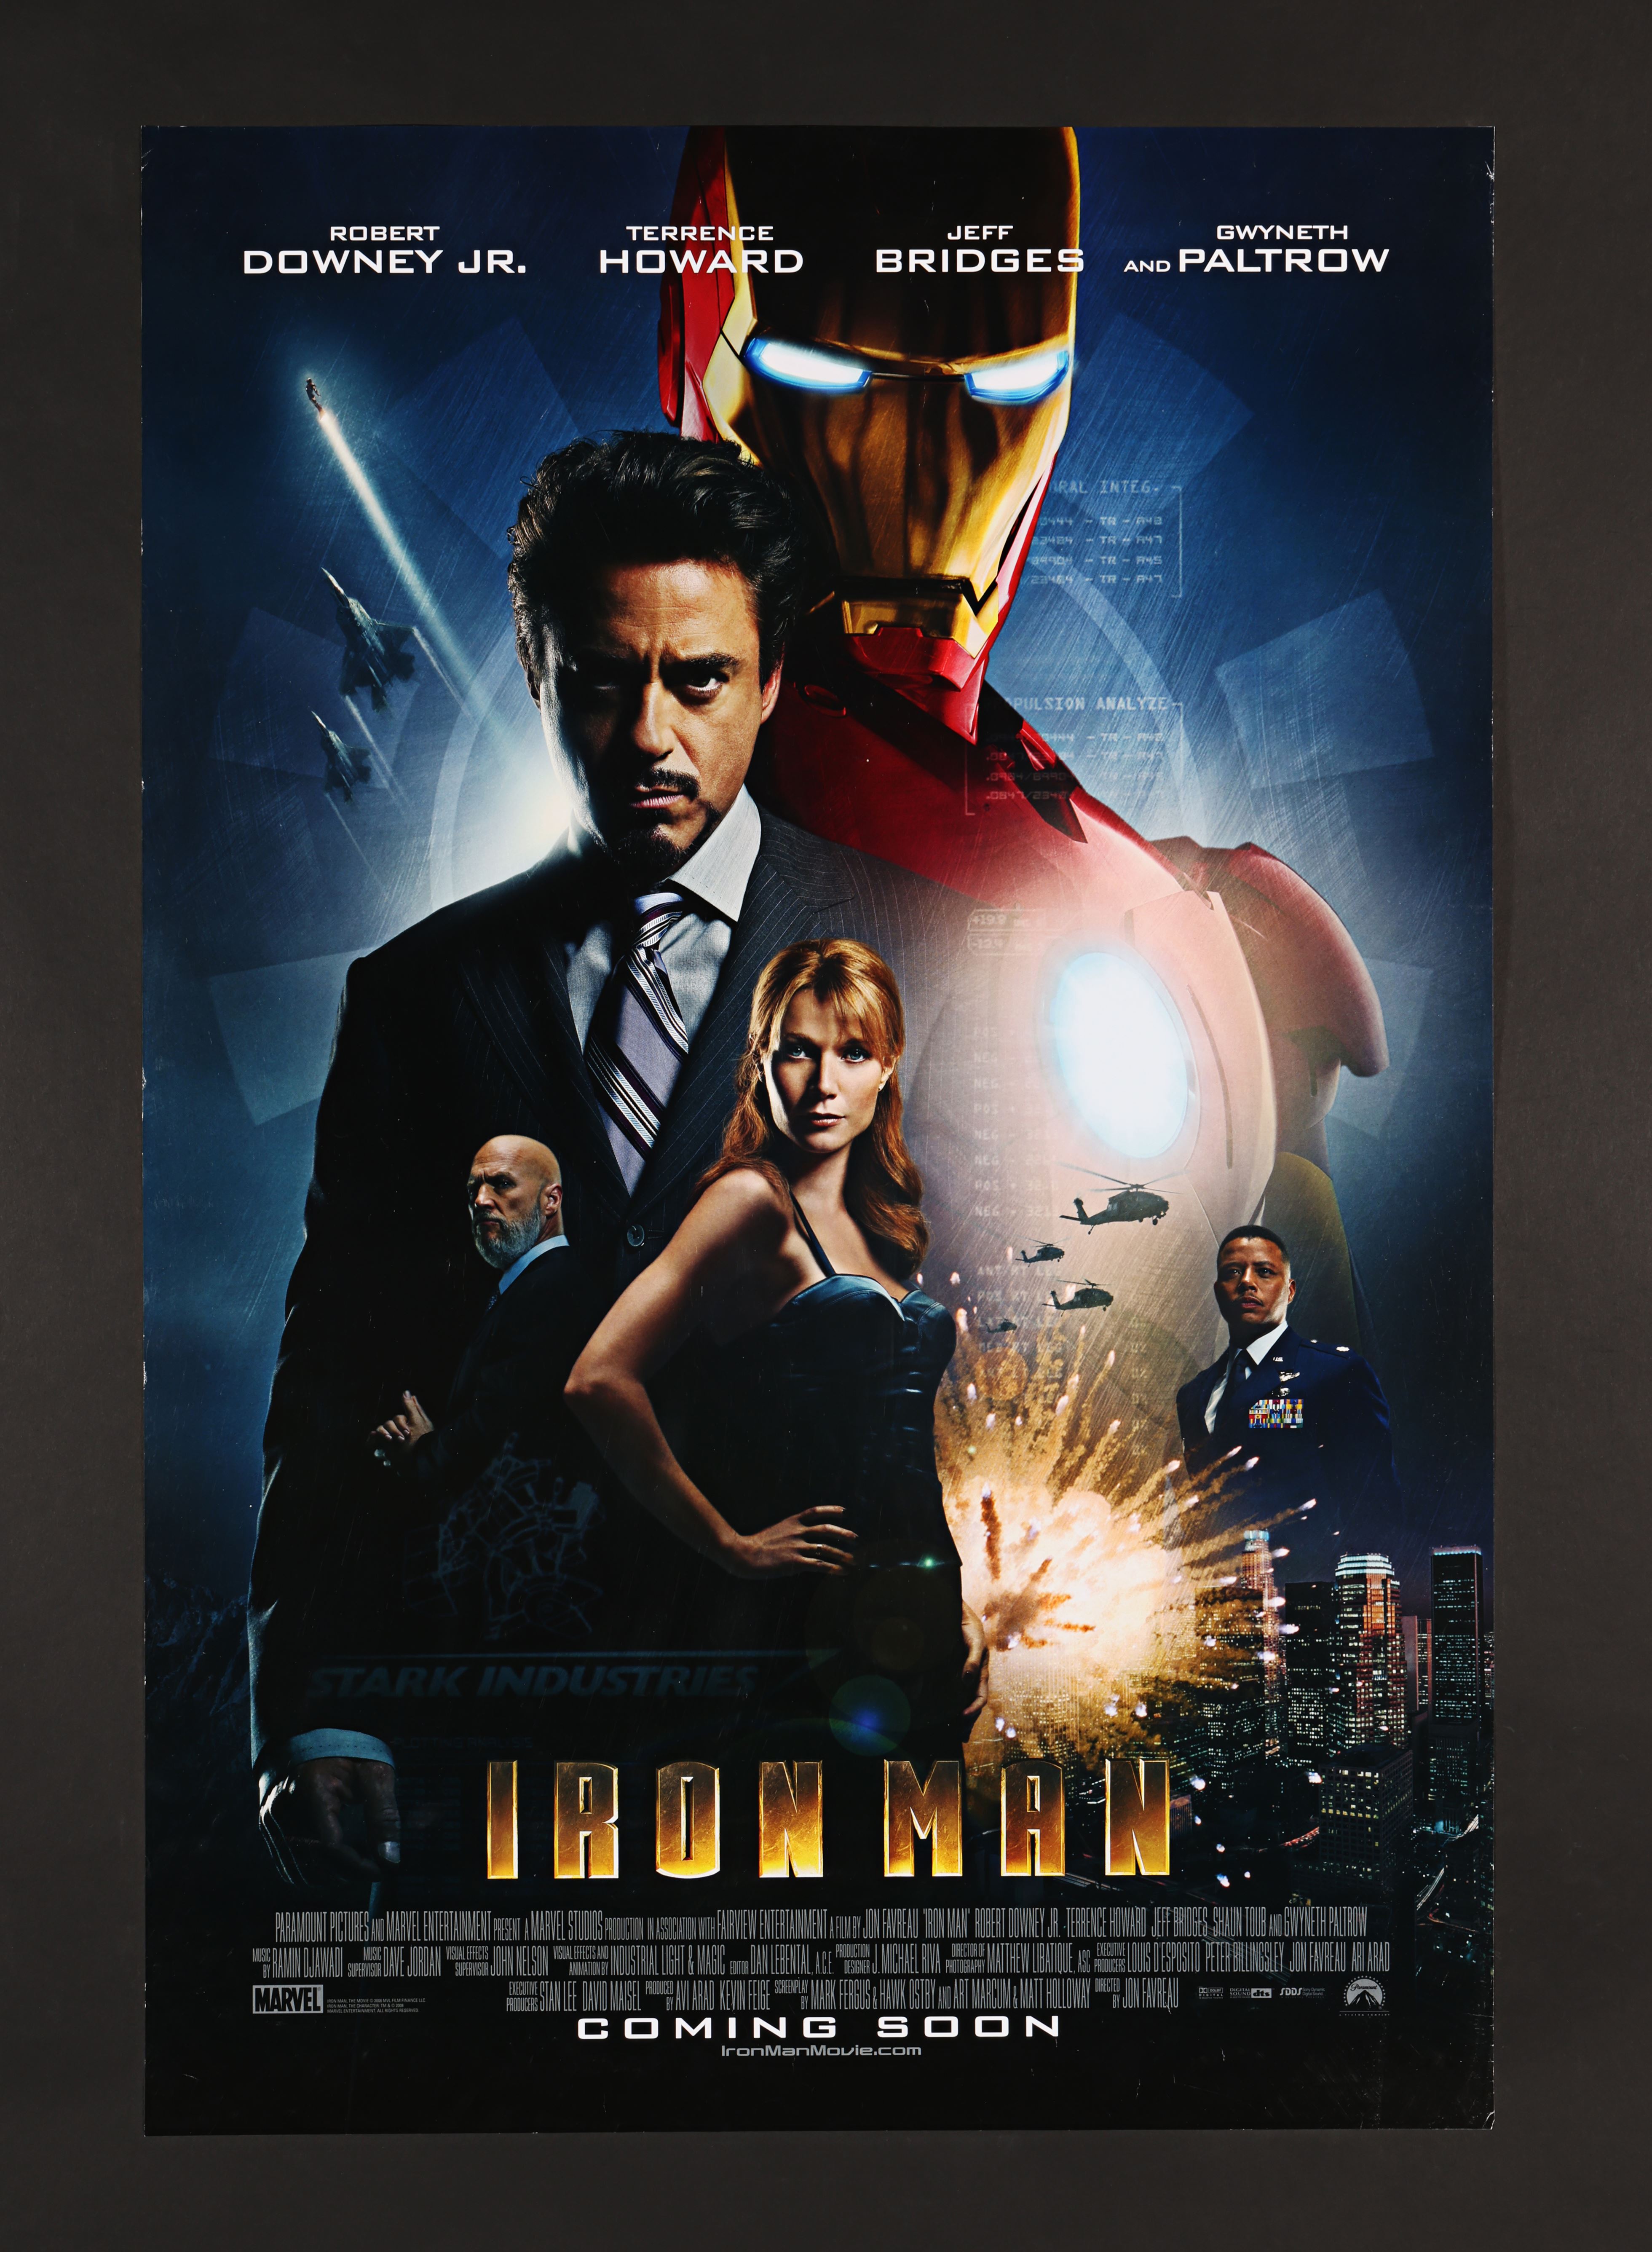 IRON MAN (2008) - Two British One-Sheets - Advance and Teaser, 2008 - Image 2 of 2